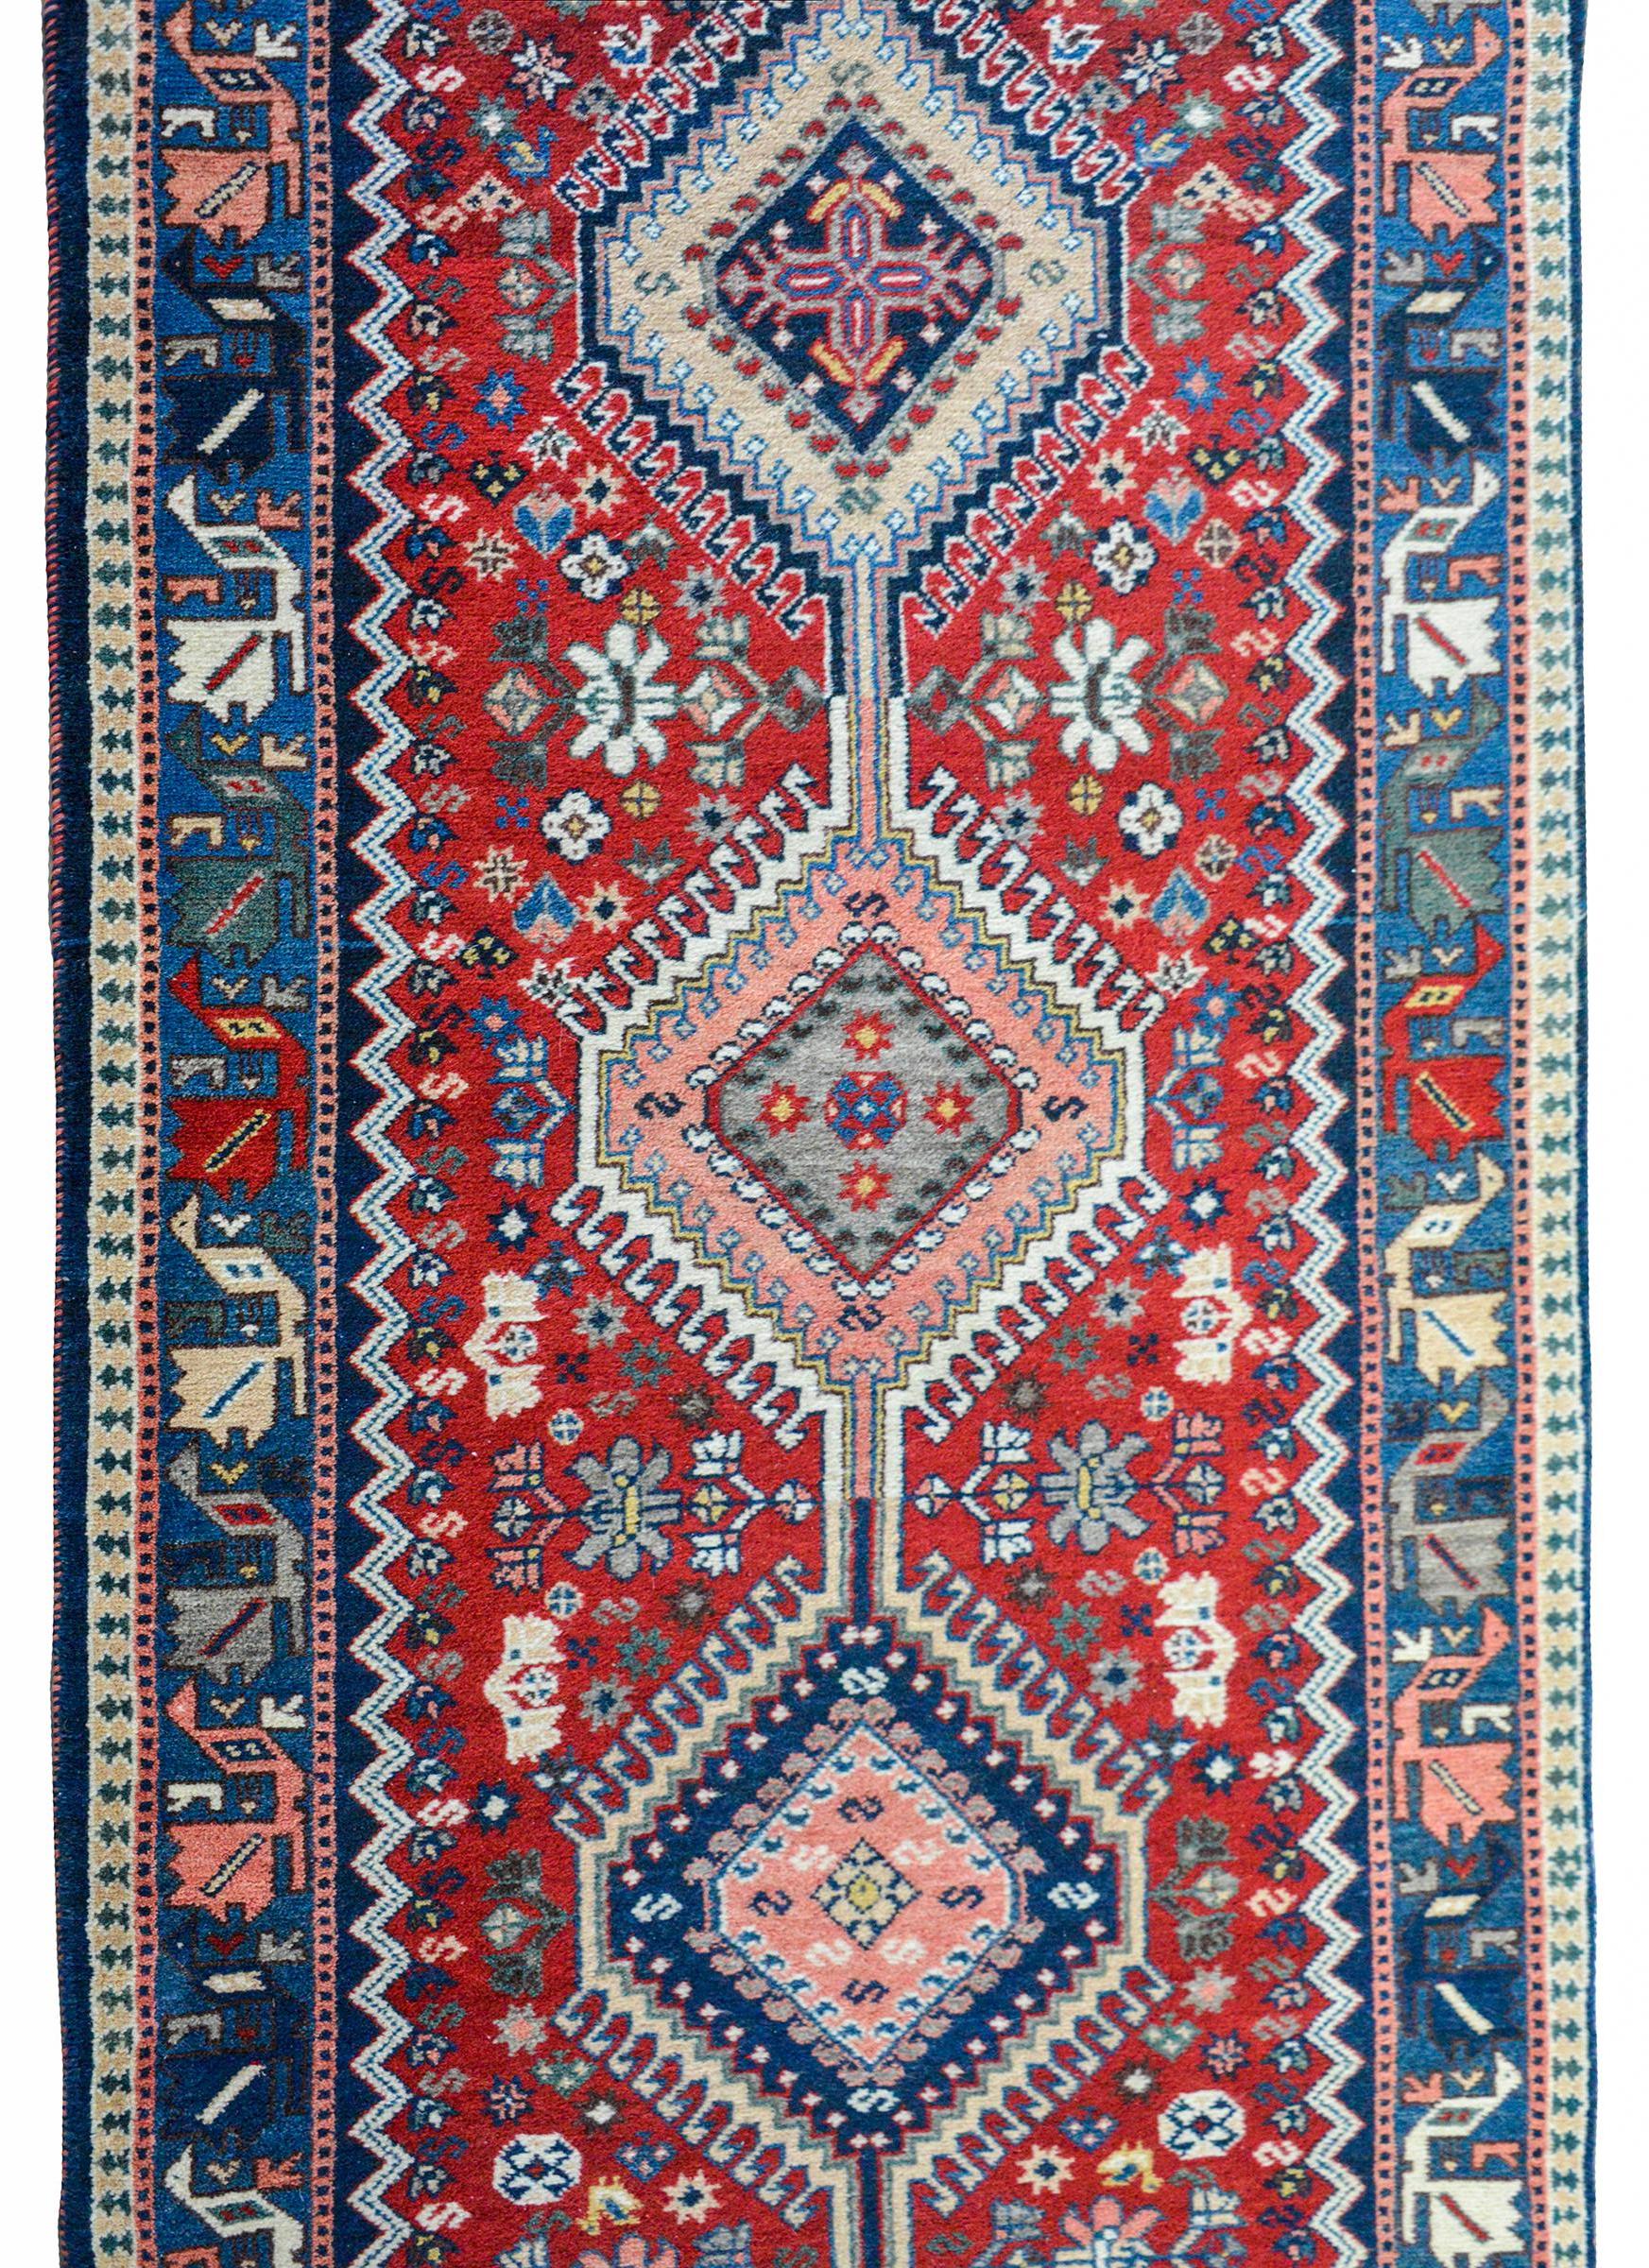 A bold 20th century Persian Yalameh runner with eight multicolored diamond-shaped medallions amidst a beautiful crimson field of flowers and surrounded by border with a stylized multi-colored floral border against an indigo background.